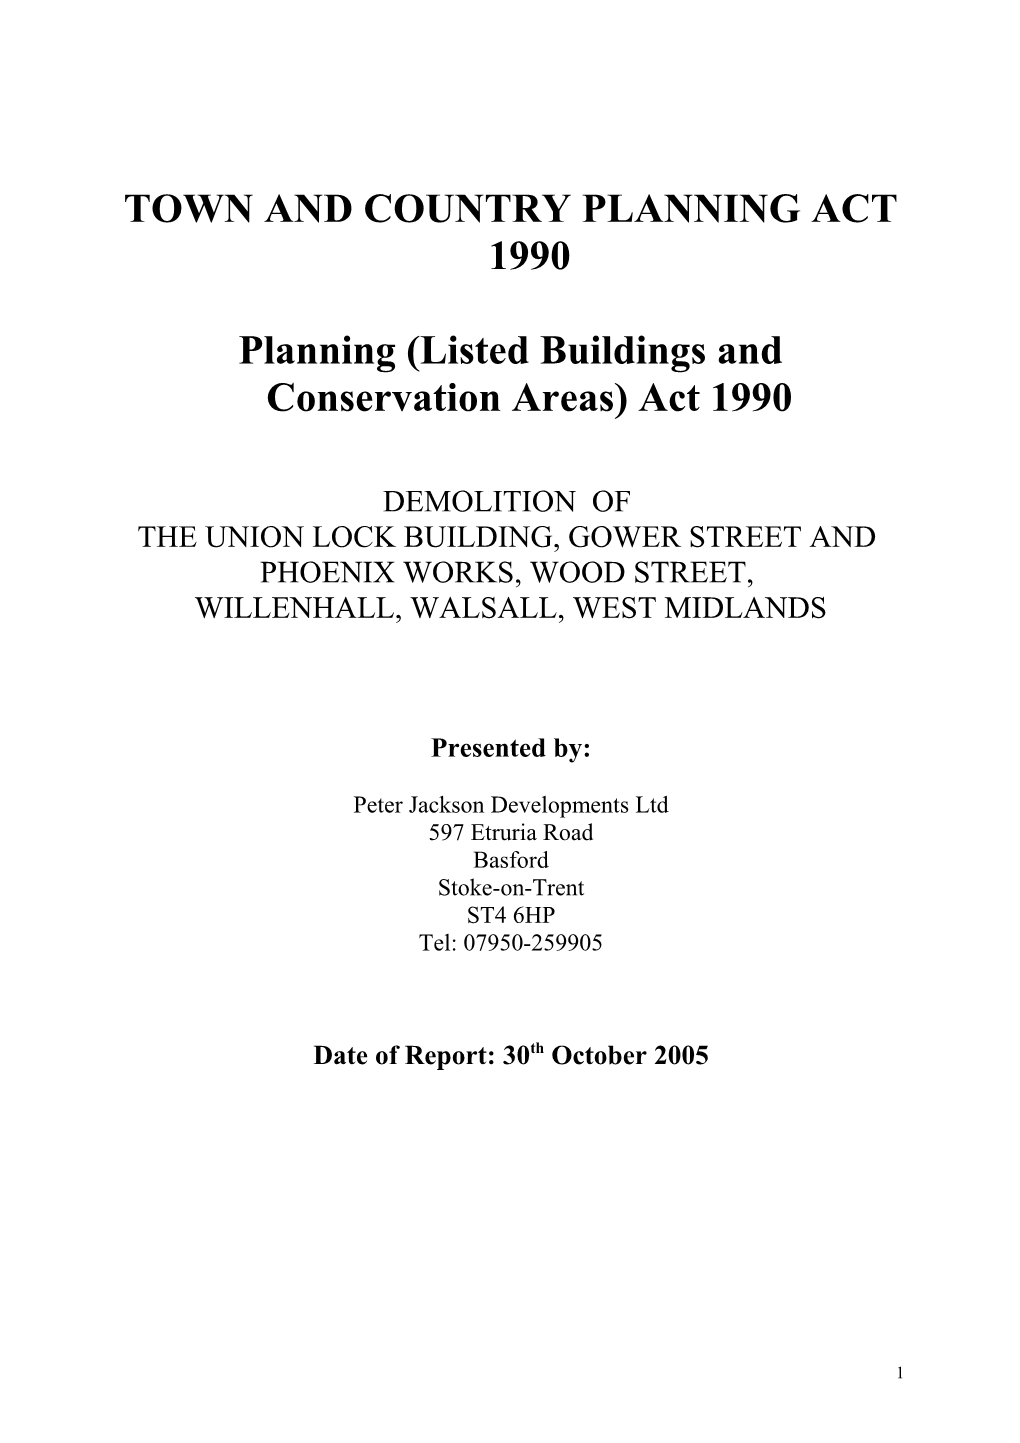 Planning (Listed Buildings and Conservation Areas) Act 1990